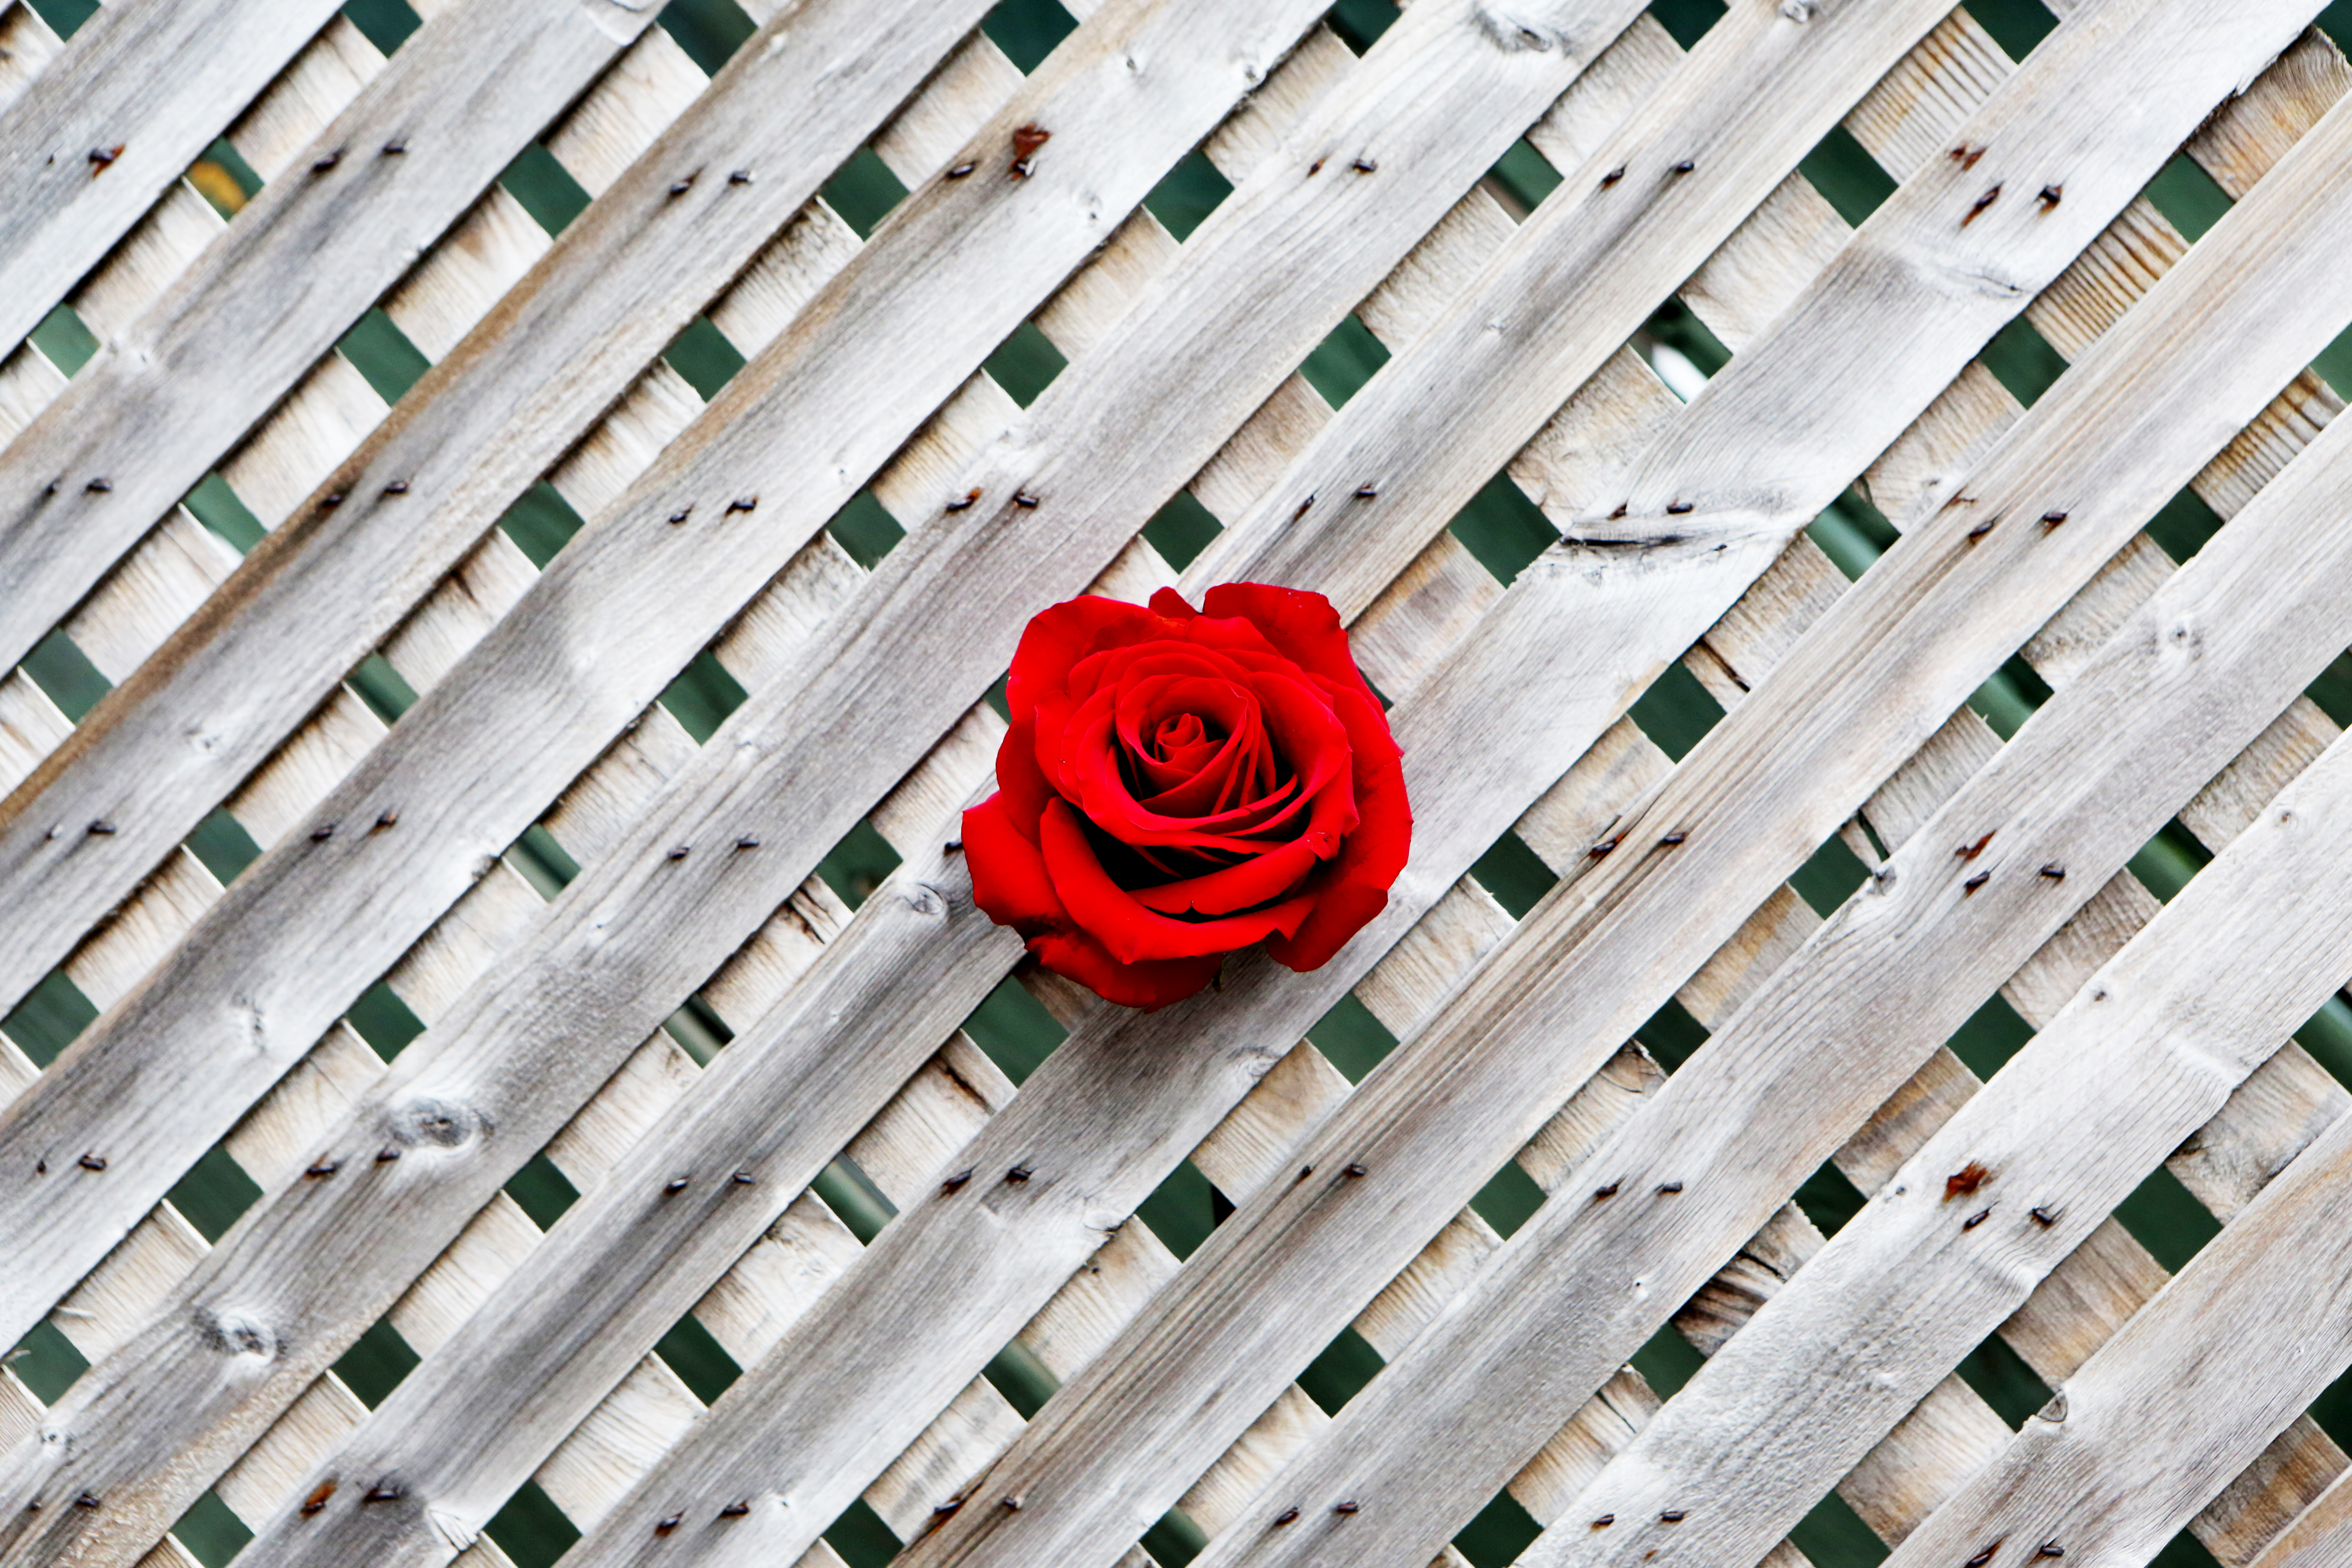 Windows Backgrounds rose, red, wood, wooden, rose flower, minimalism, wall, fence